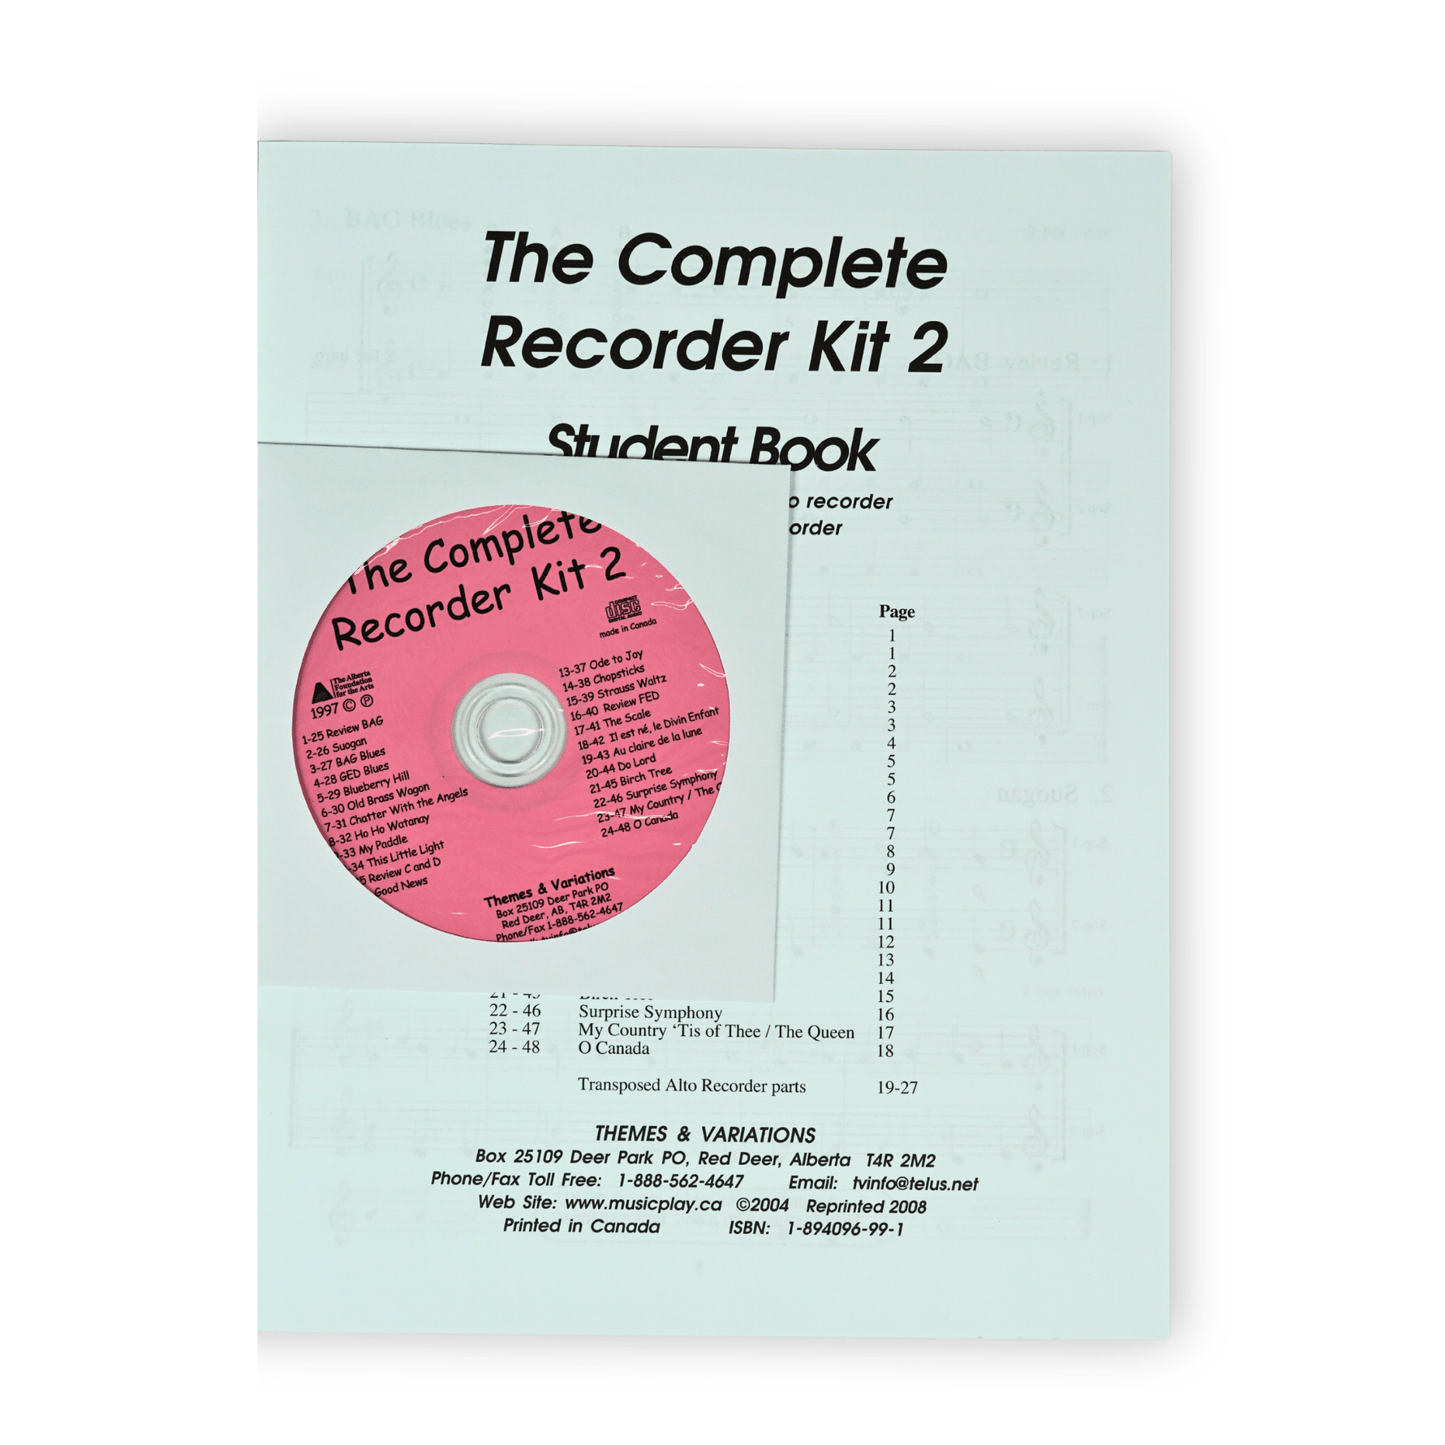 The Complete Recorder Kit 2, Student Book by Denise Gagné + CD - Q335 - Empire Music Co. Ltd-Books-EMUS